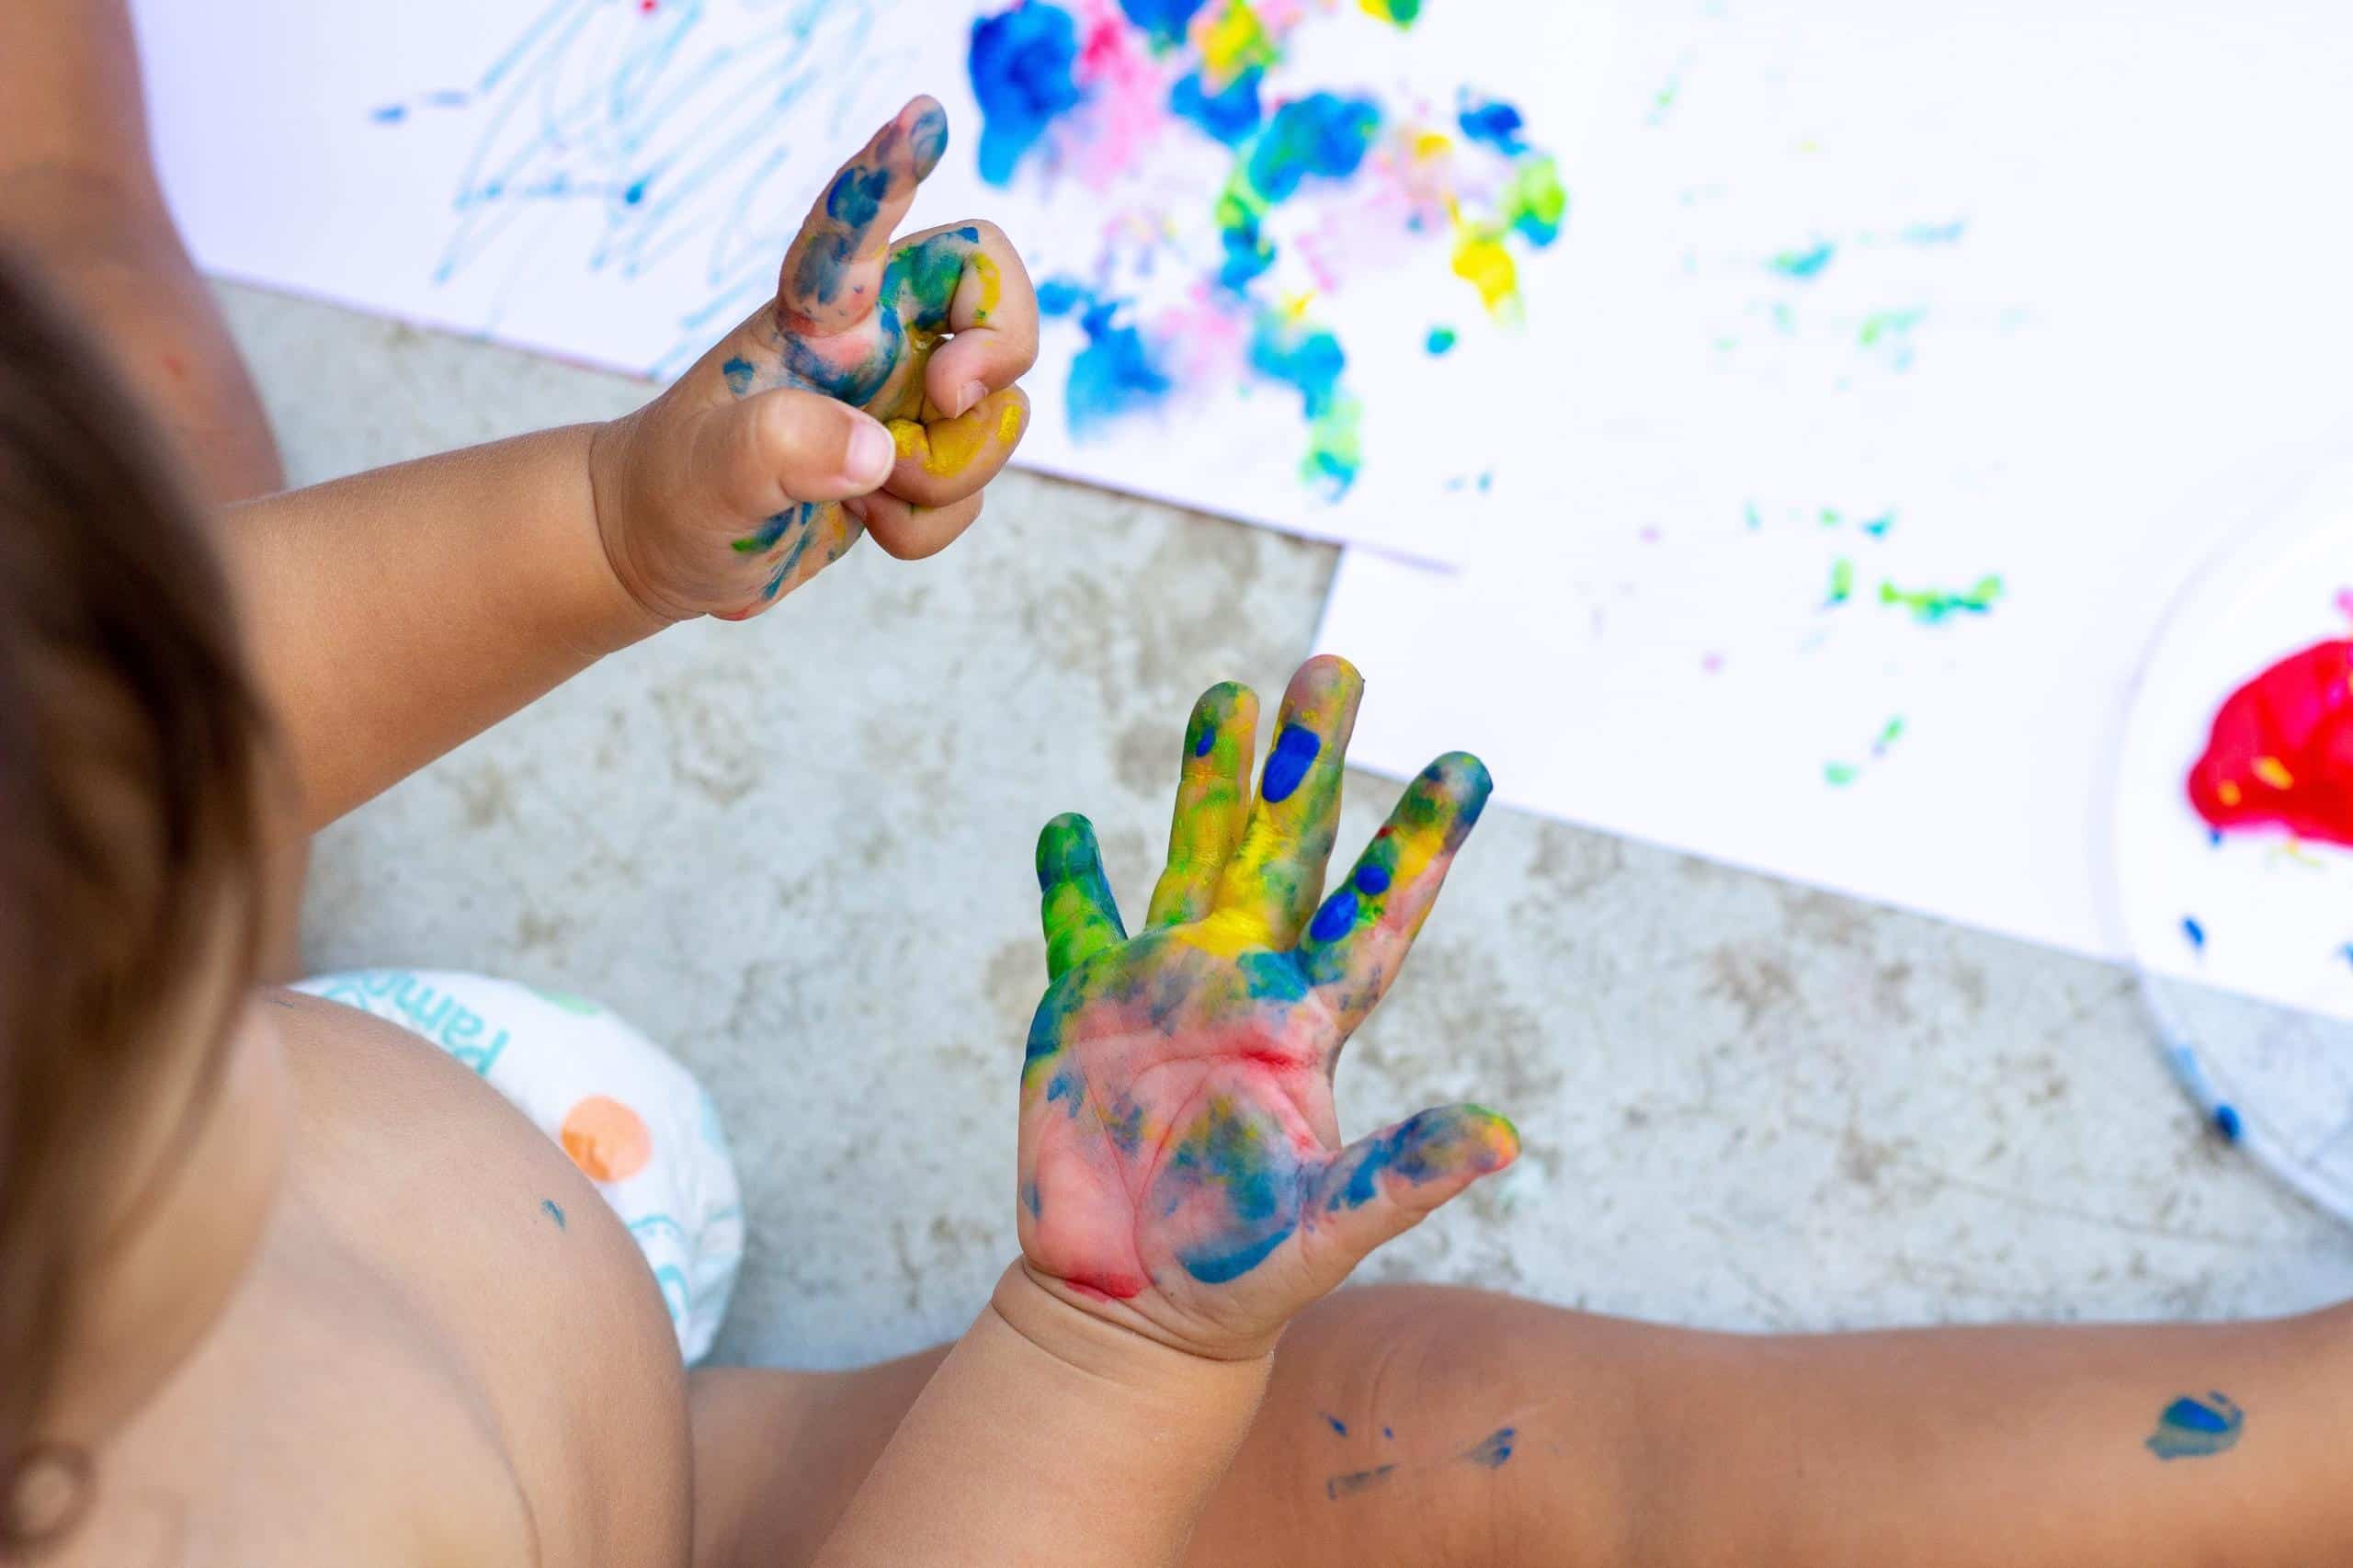 Toddler looking at his hands full of colors because it was ice painting